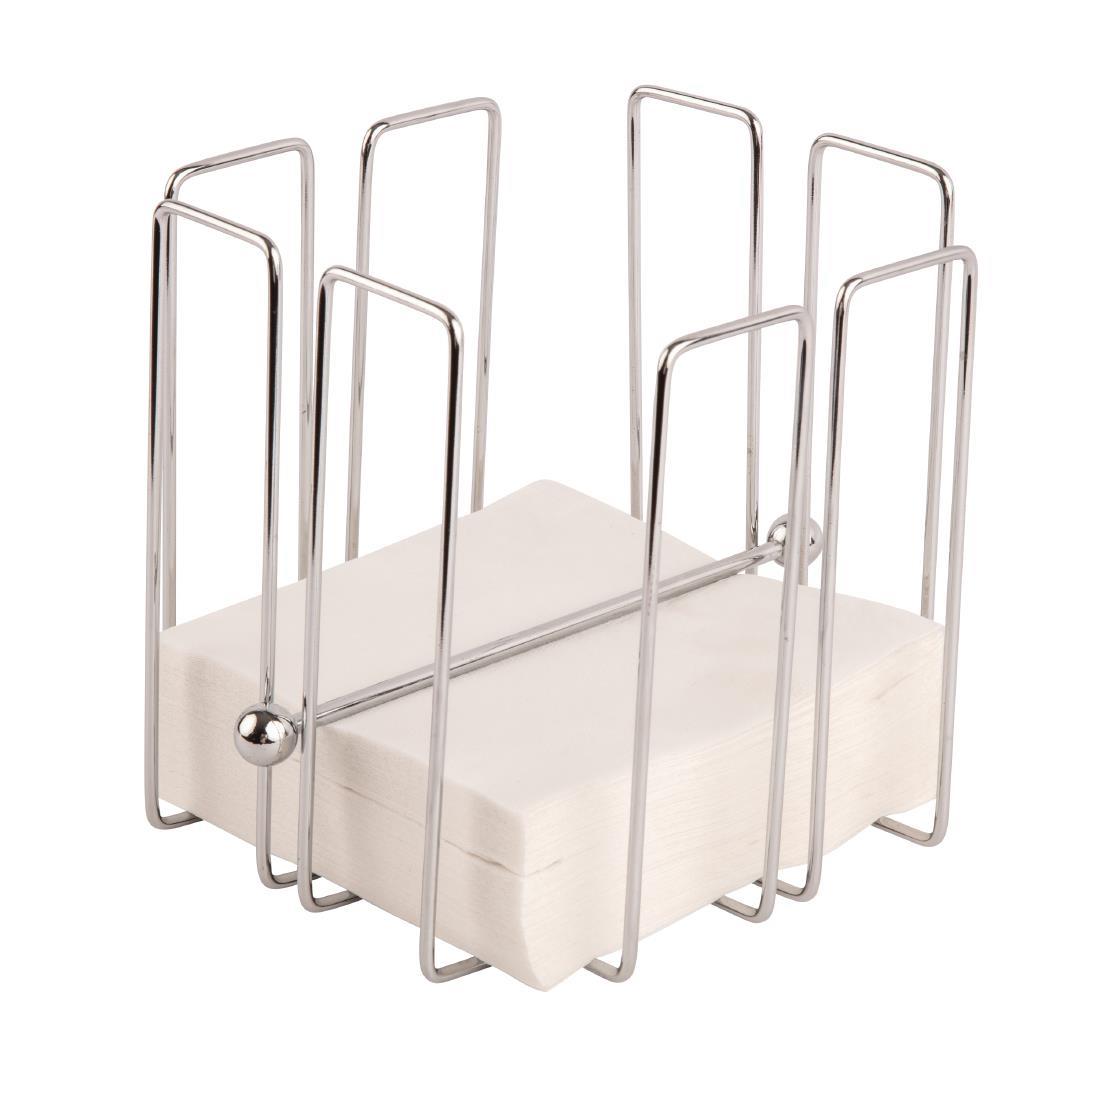 Olympia Napkin Holder with Weight 190 x 190mm - T763  - 3